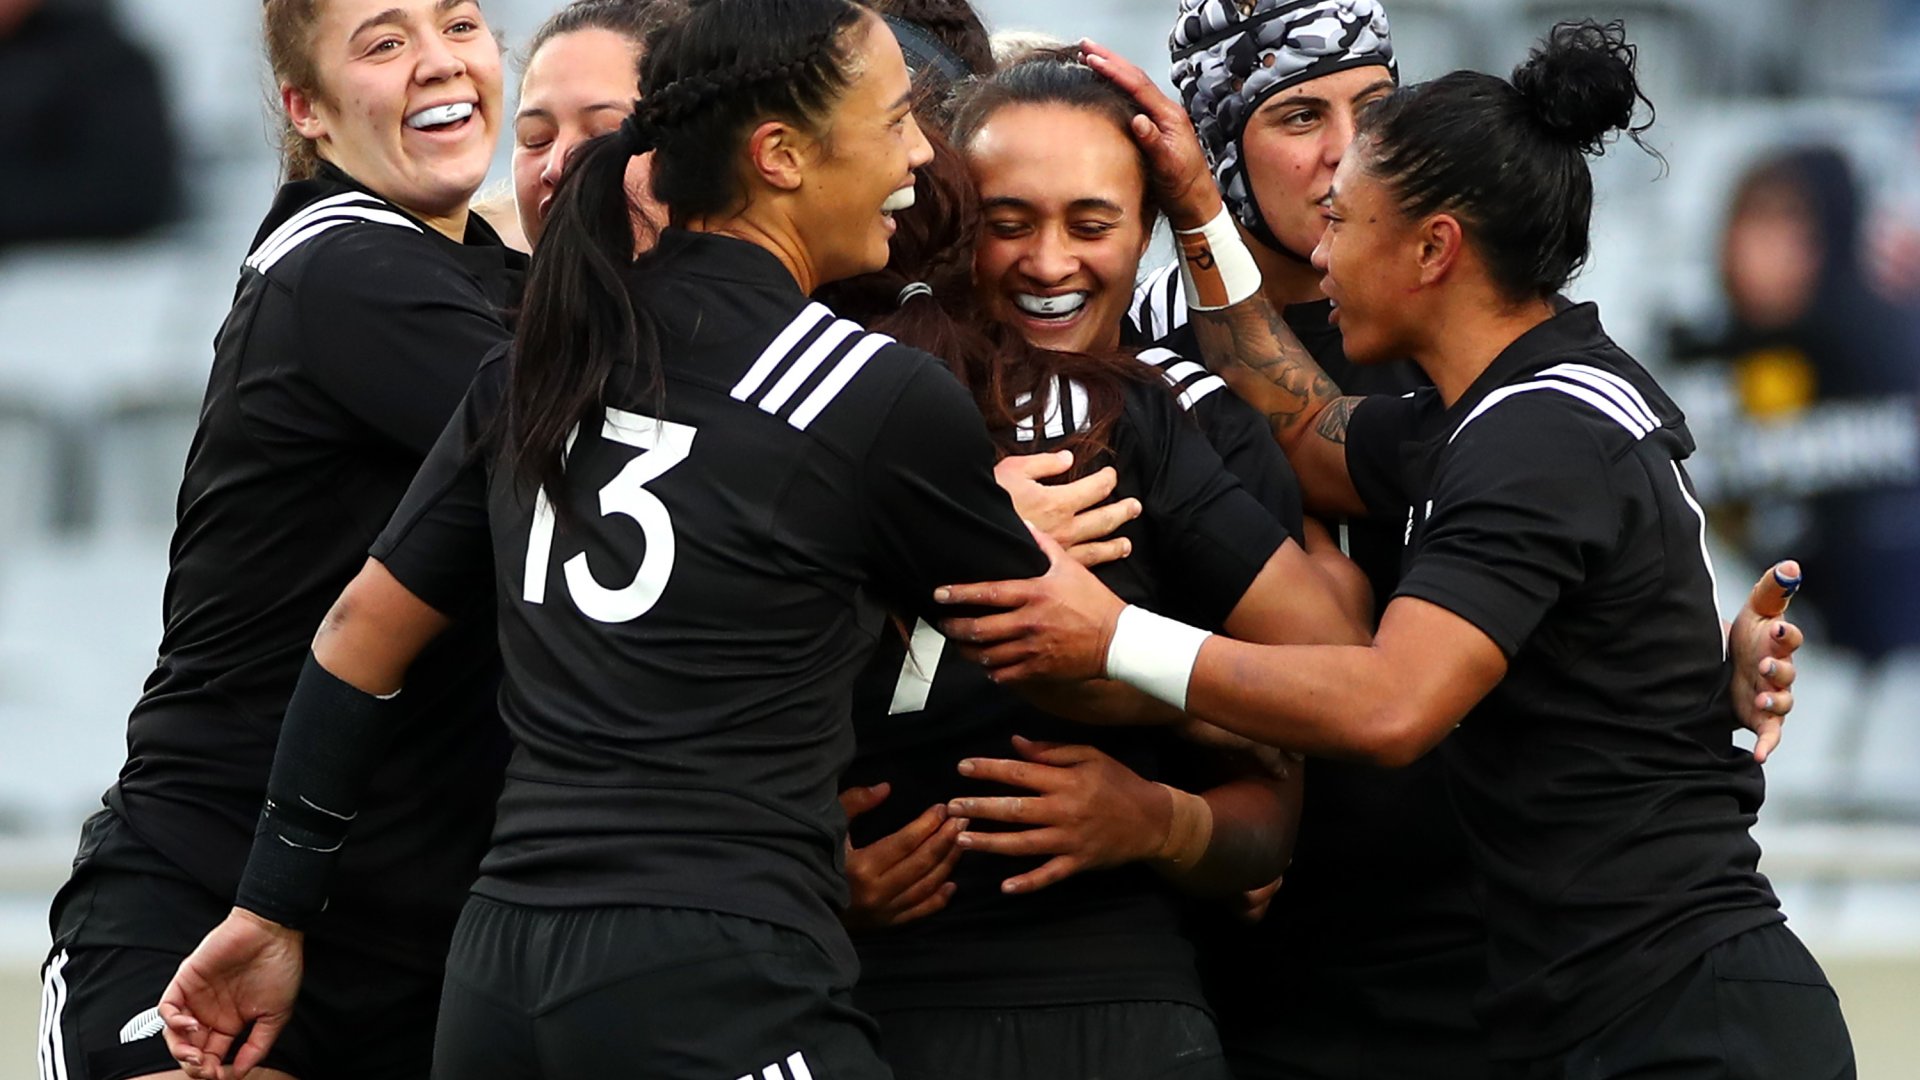 Actionpacked week ahead as New Zealand Black Ferns women's rugby team plays in Nelson Our Nelson